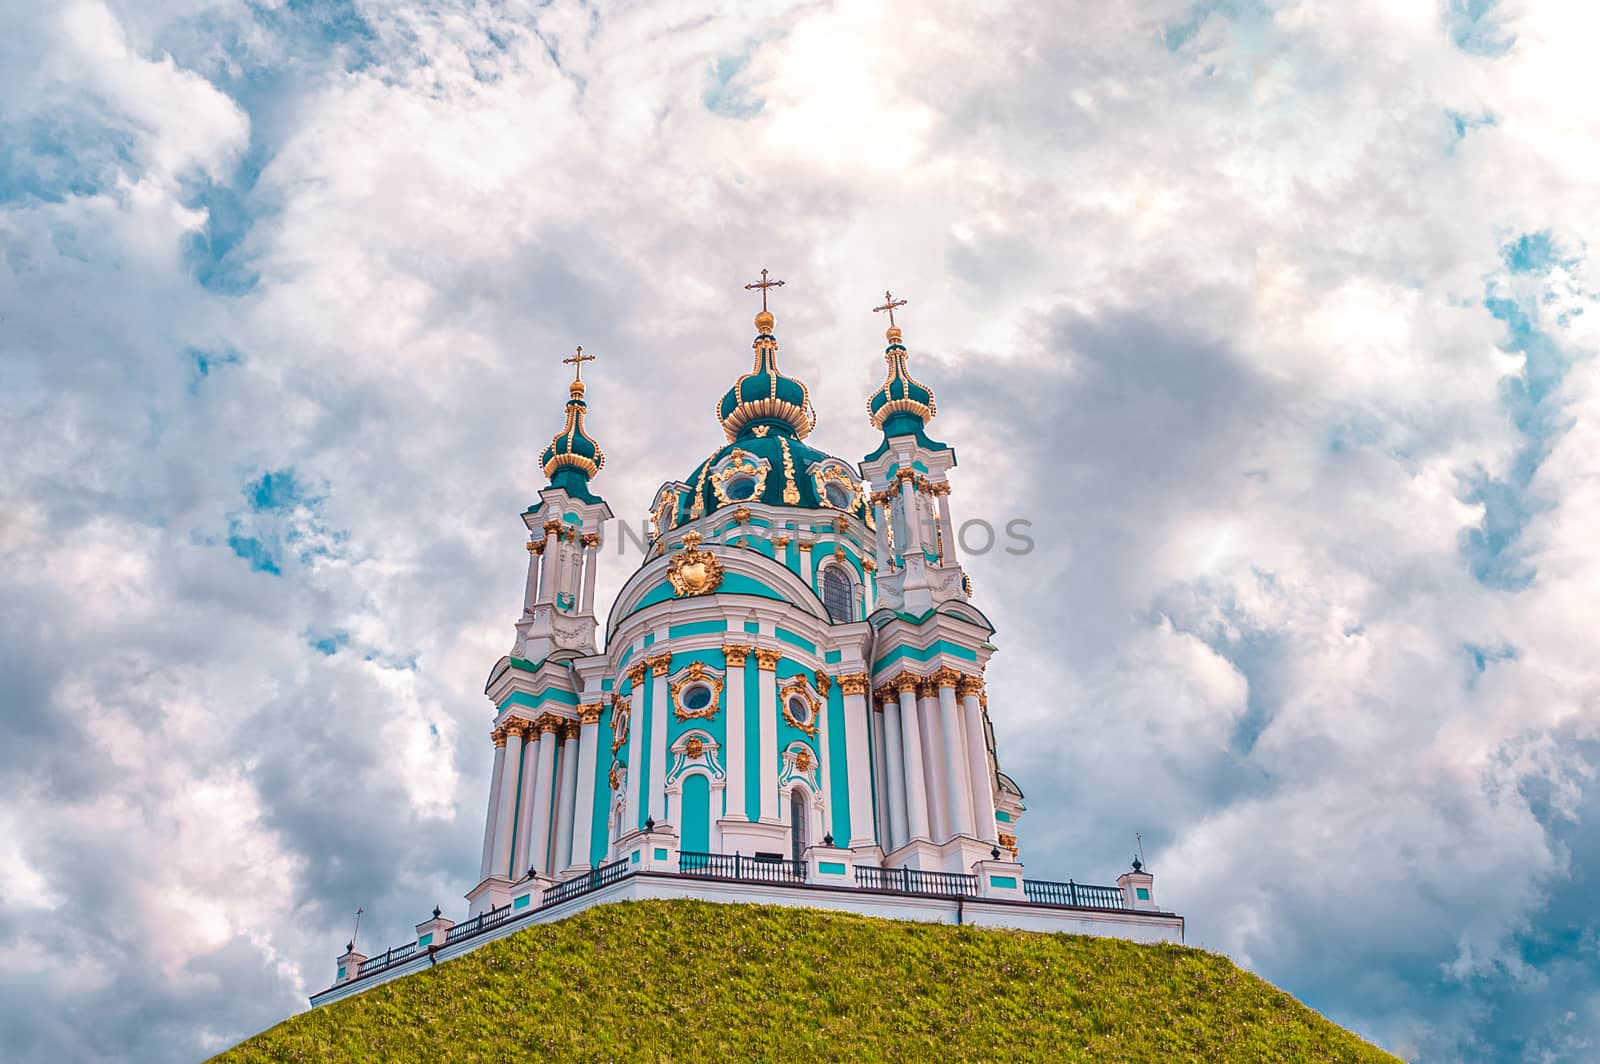 St. Andrews Church - major Baroque church is located at the top of the Andriyivskyy Descent in Kyiv, Ukraine